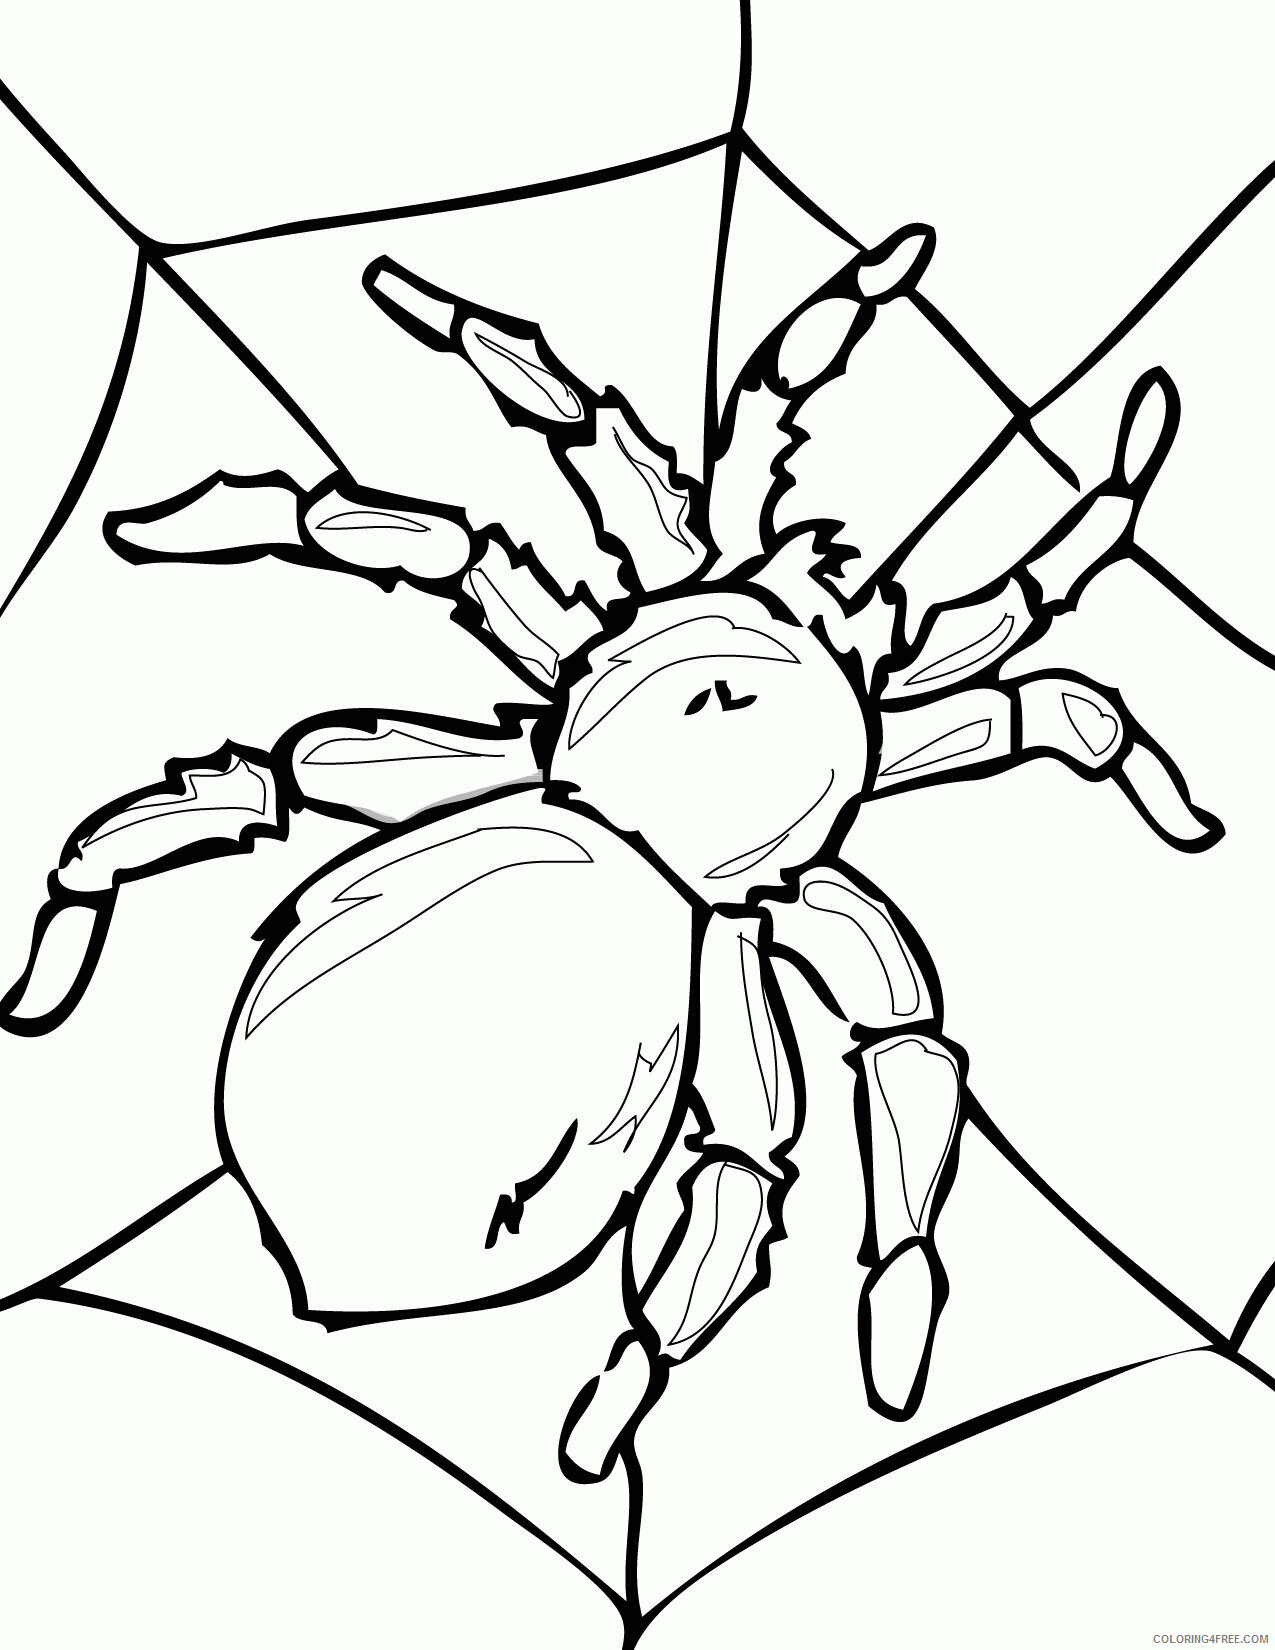 Spider Coloring Sheets Animal Coloring Pages Printable 2021 4275 Coloring4free